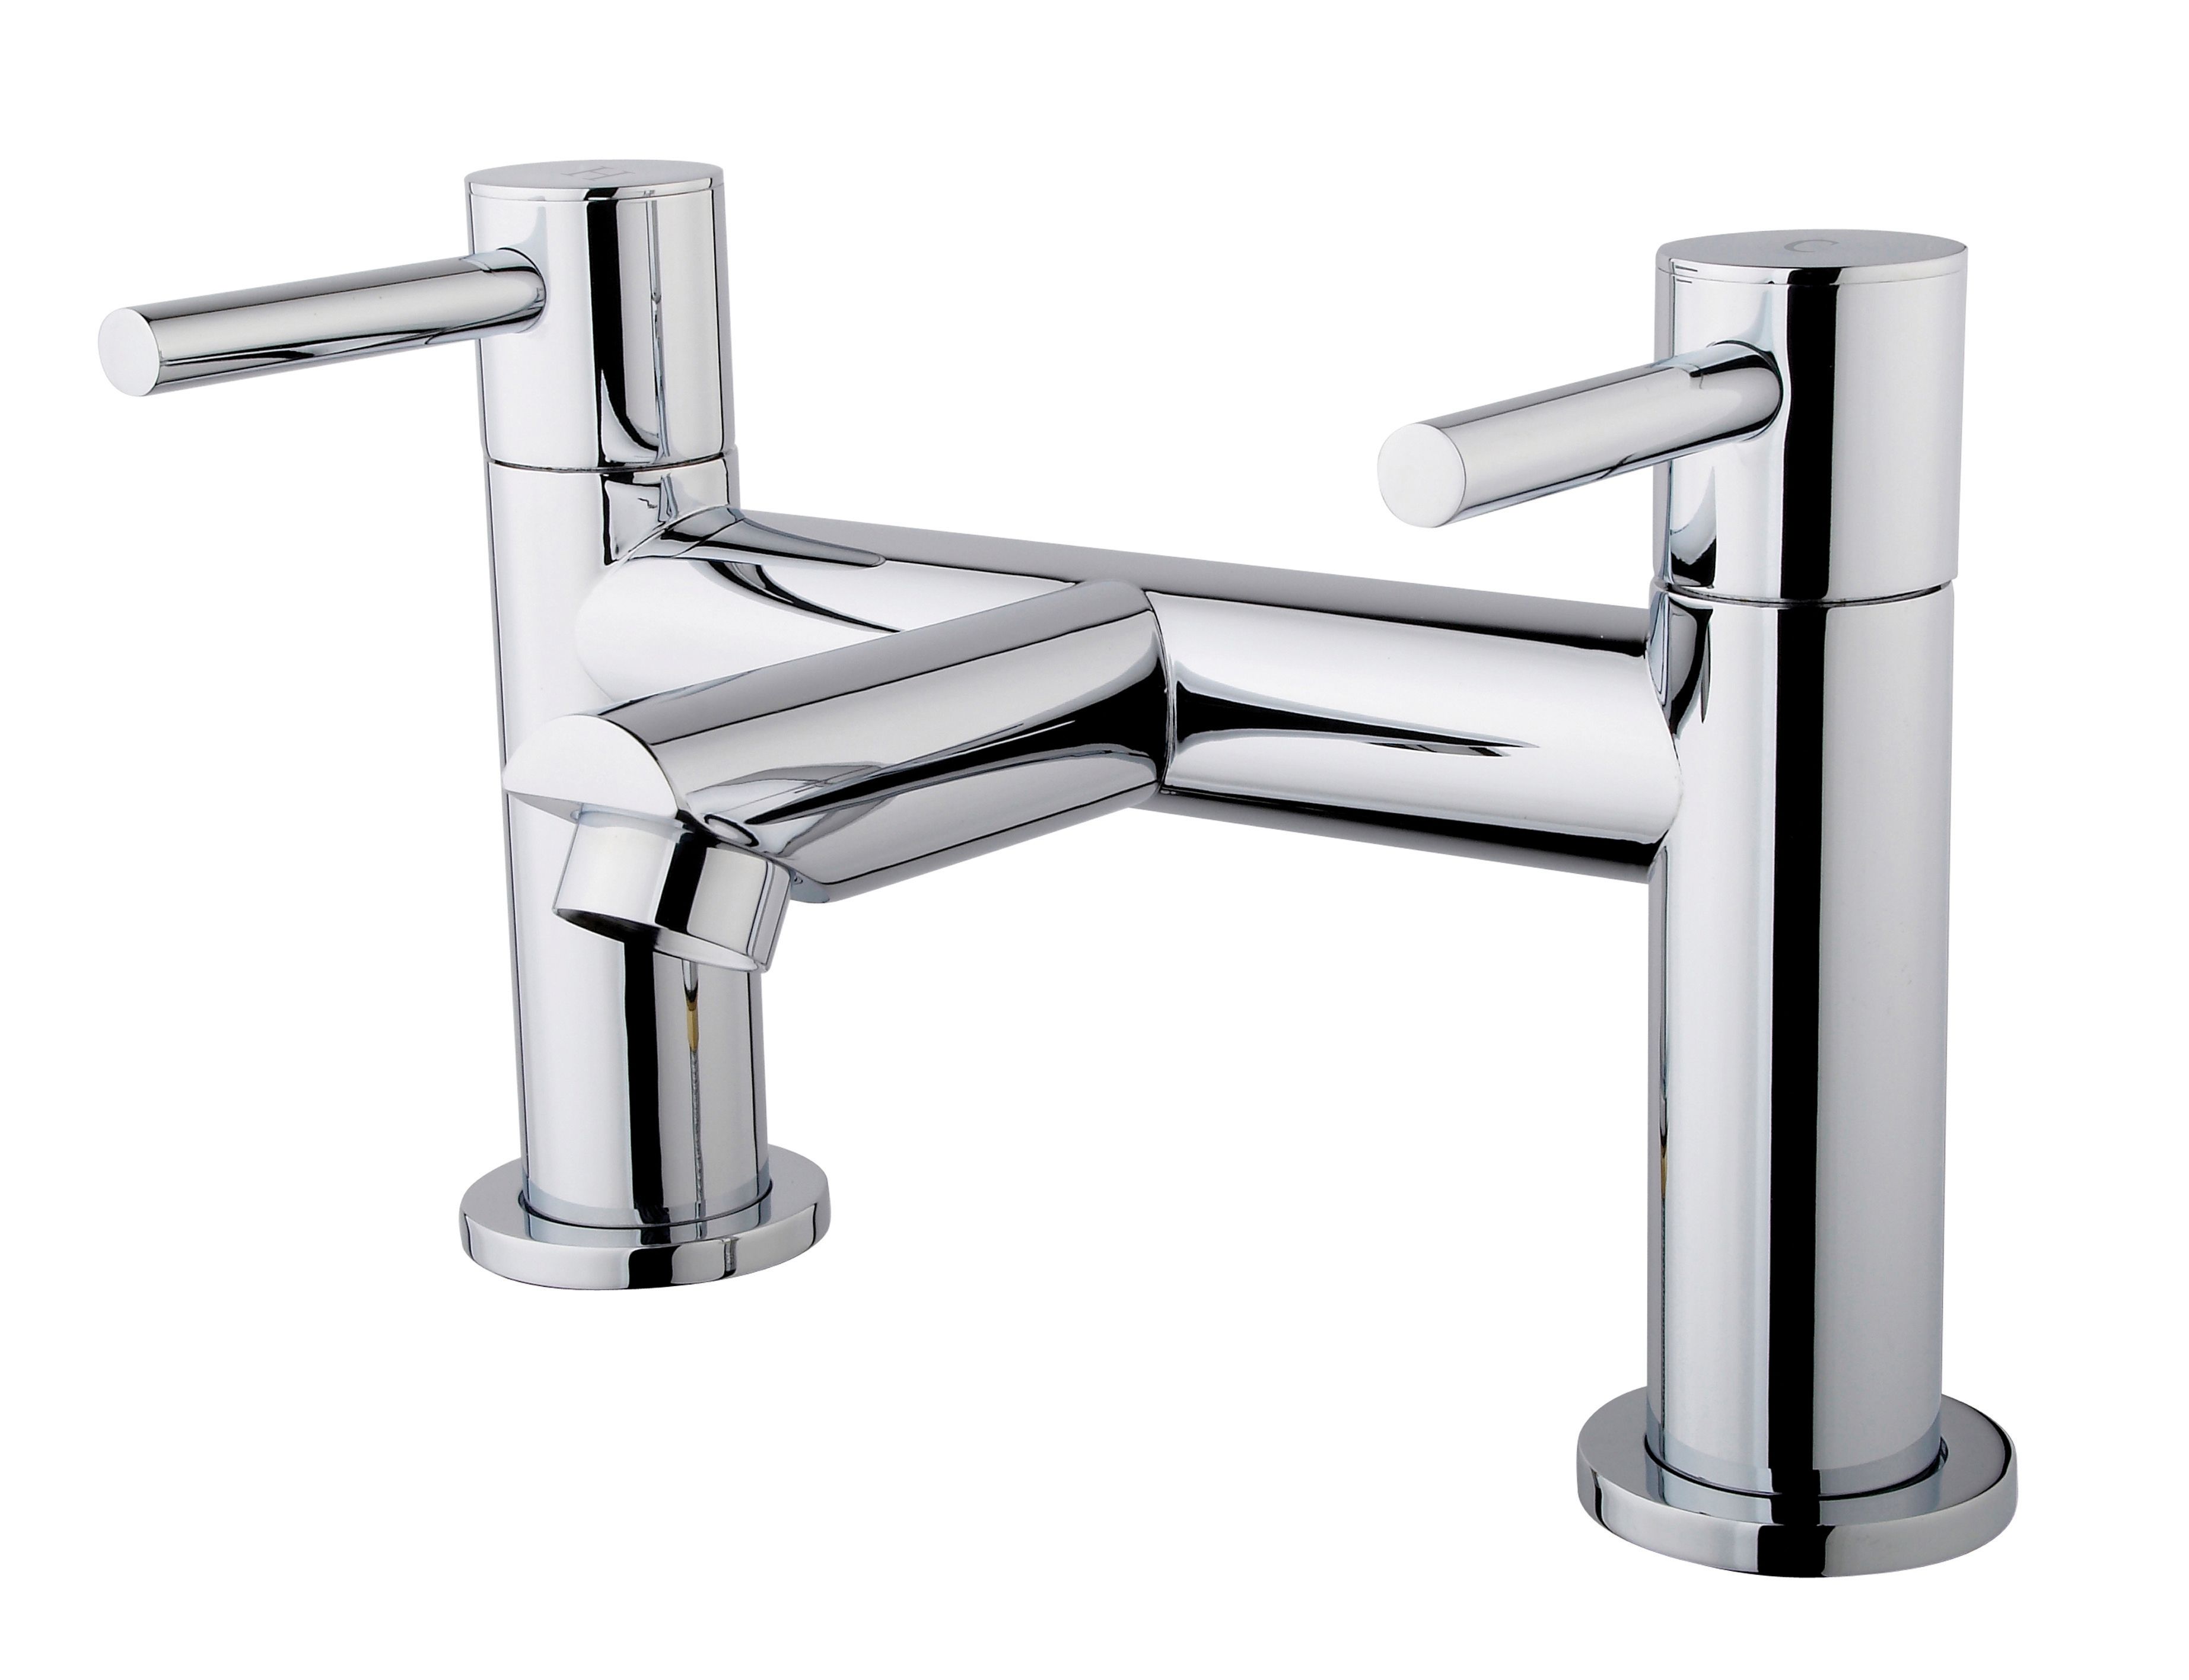 Image of Wickes Mirang Chrome Bath Filler Tap